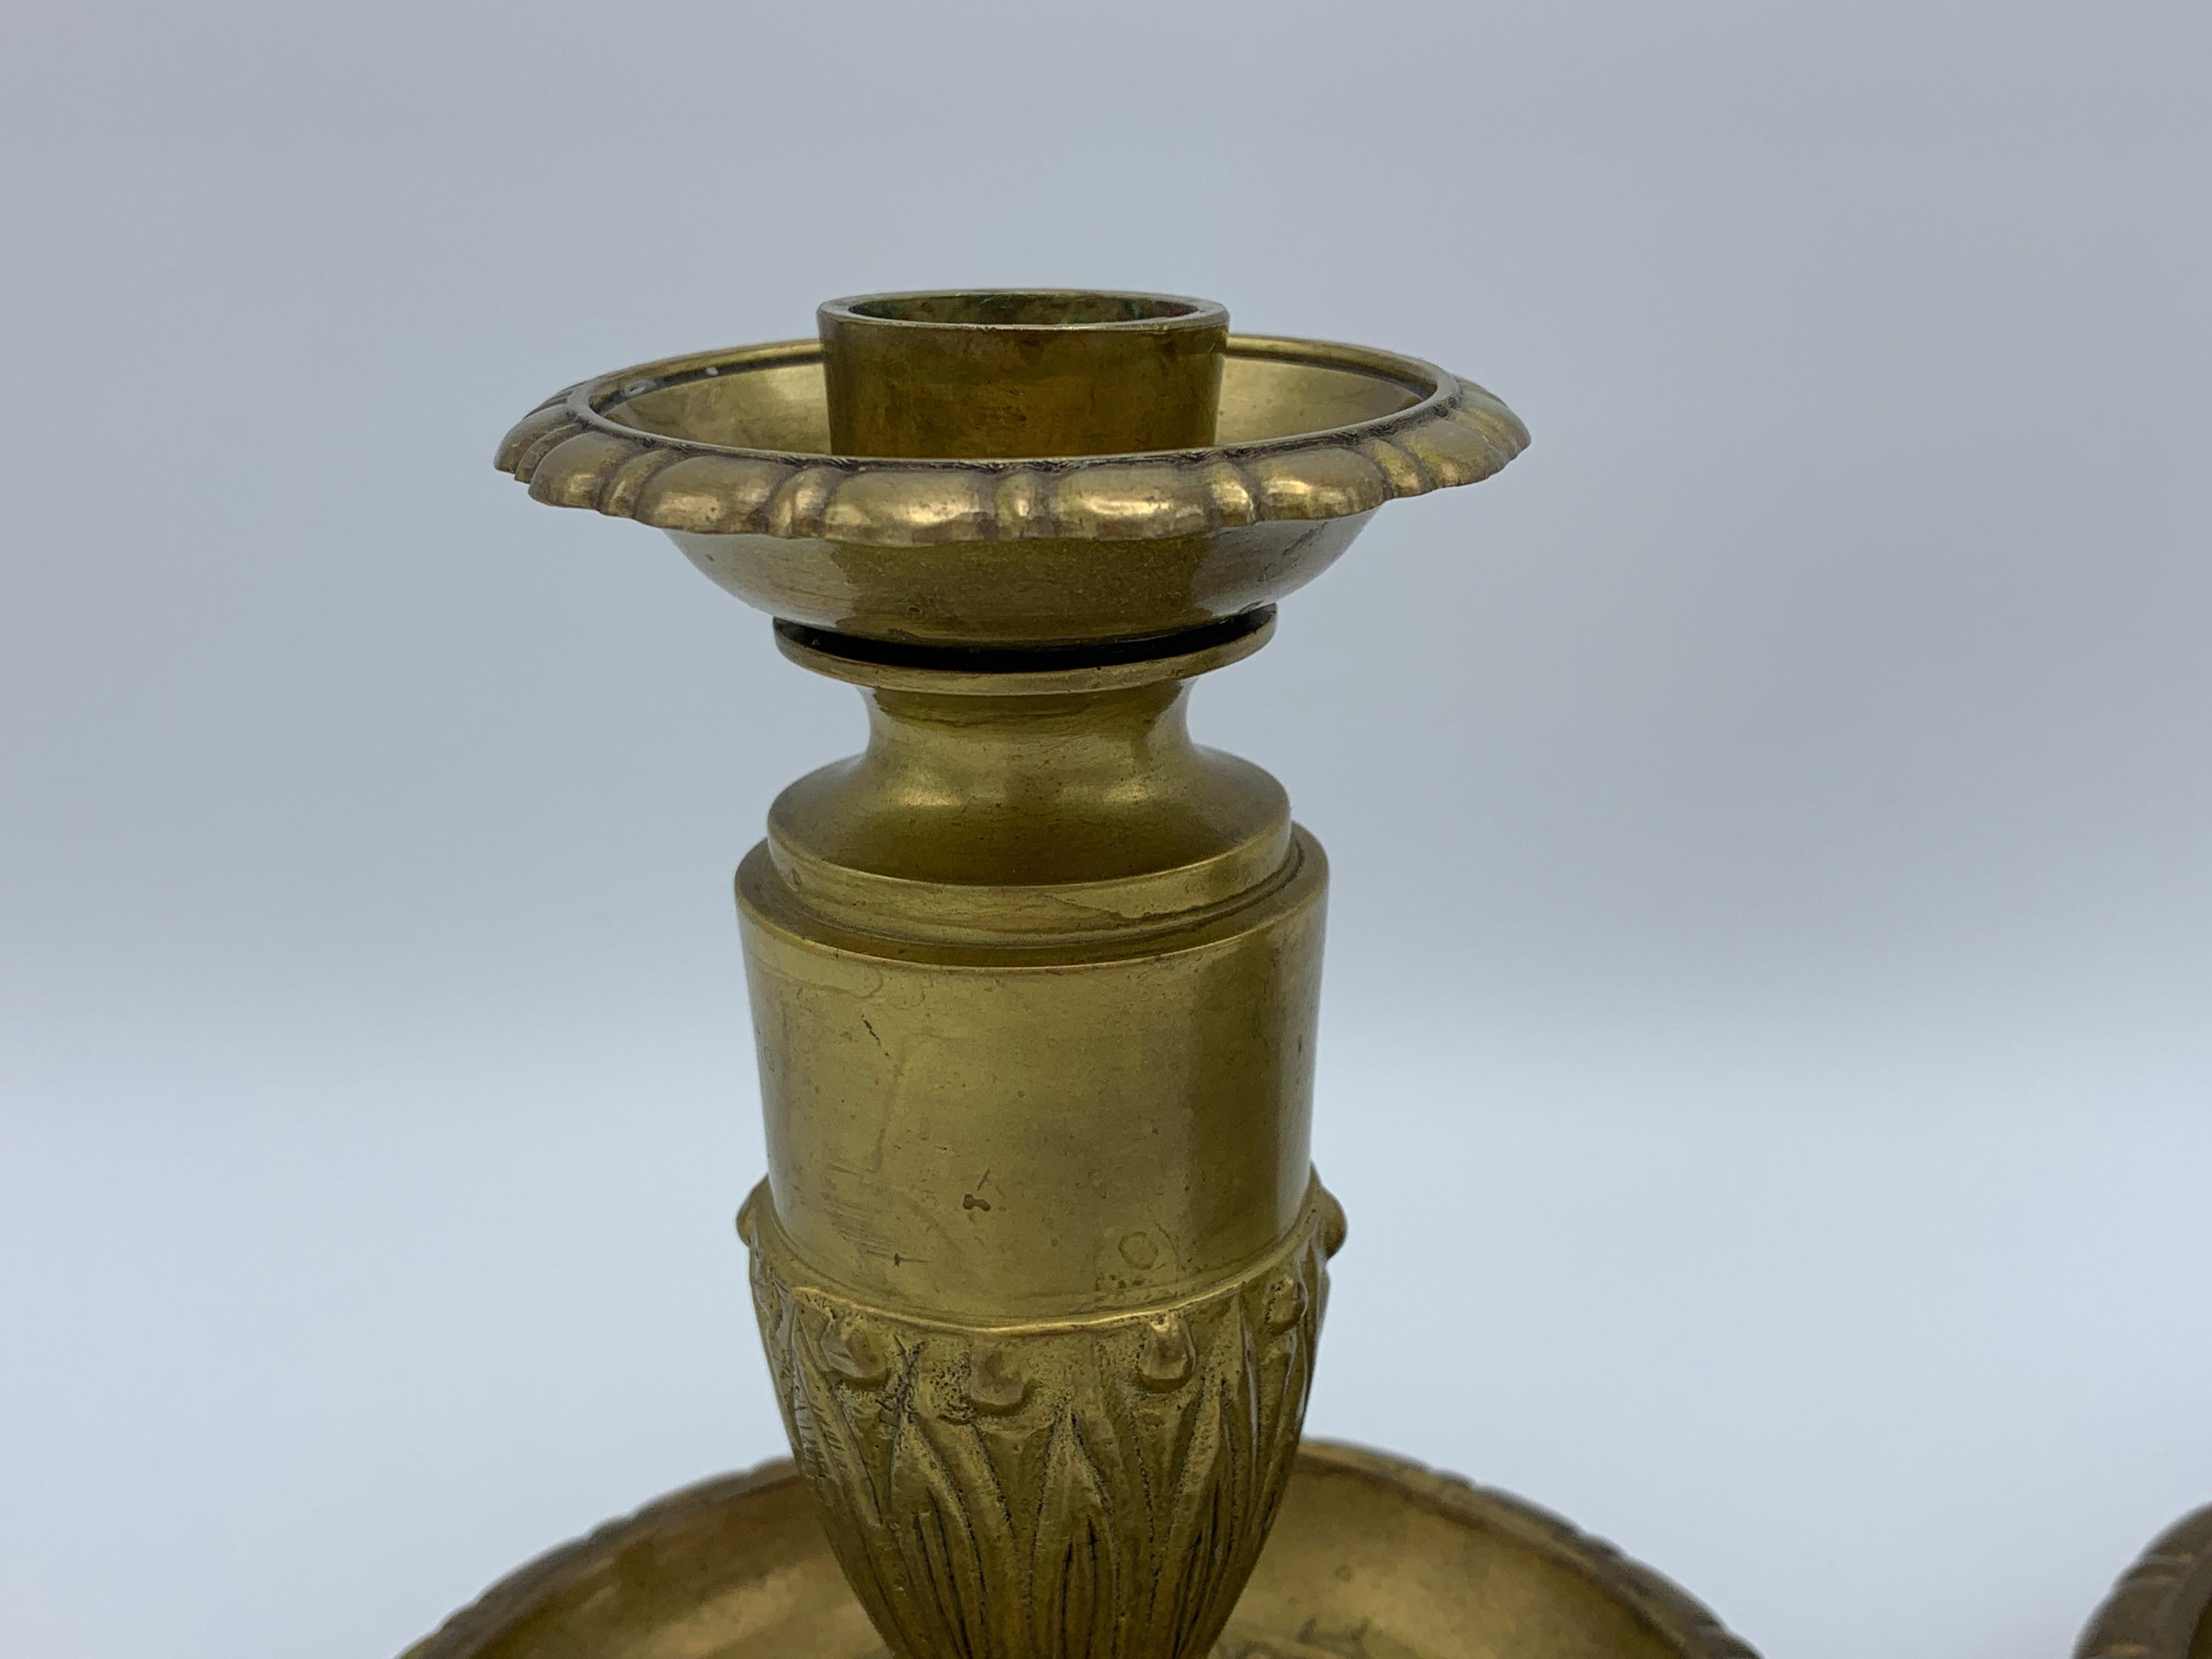 Offered is a fabulous, pair of traditional, 1960s Italian brass candlestick holders. The pair have lovely detailing all-over, with thick scalloped edges, a deep burnished brass finish (polish able by buyer), and both have substantial weight. The